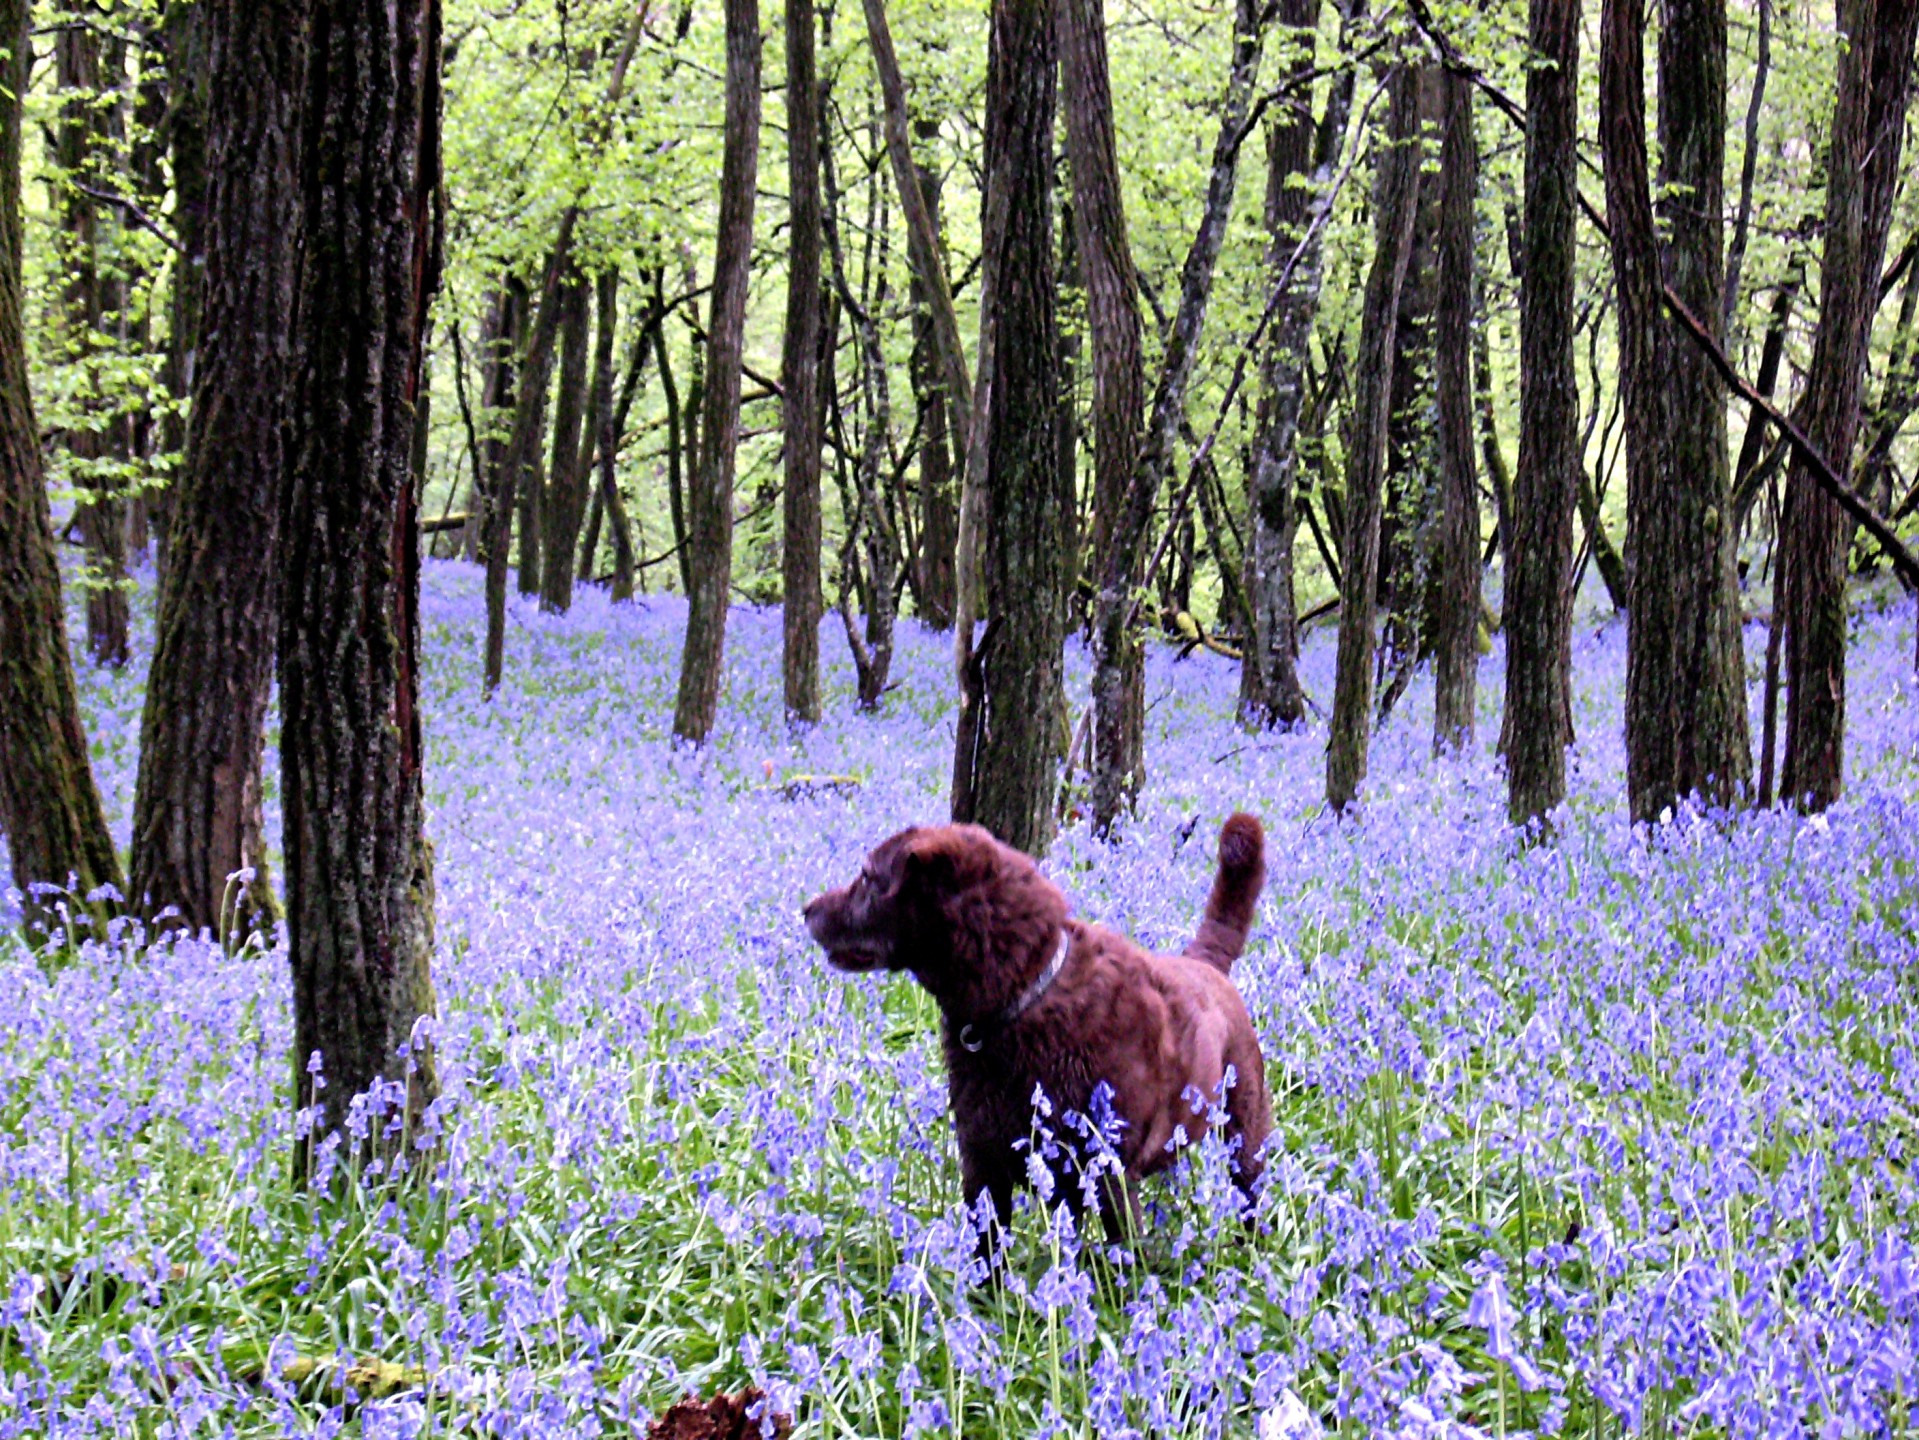 Dog In Woods With Bluebells